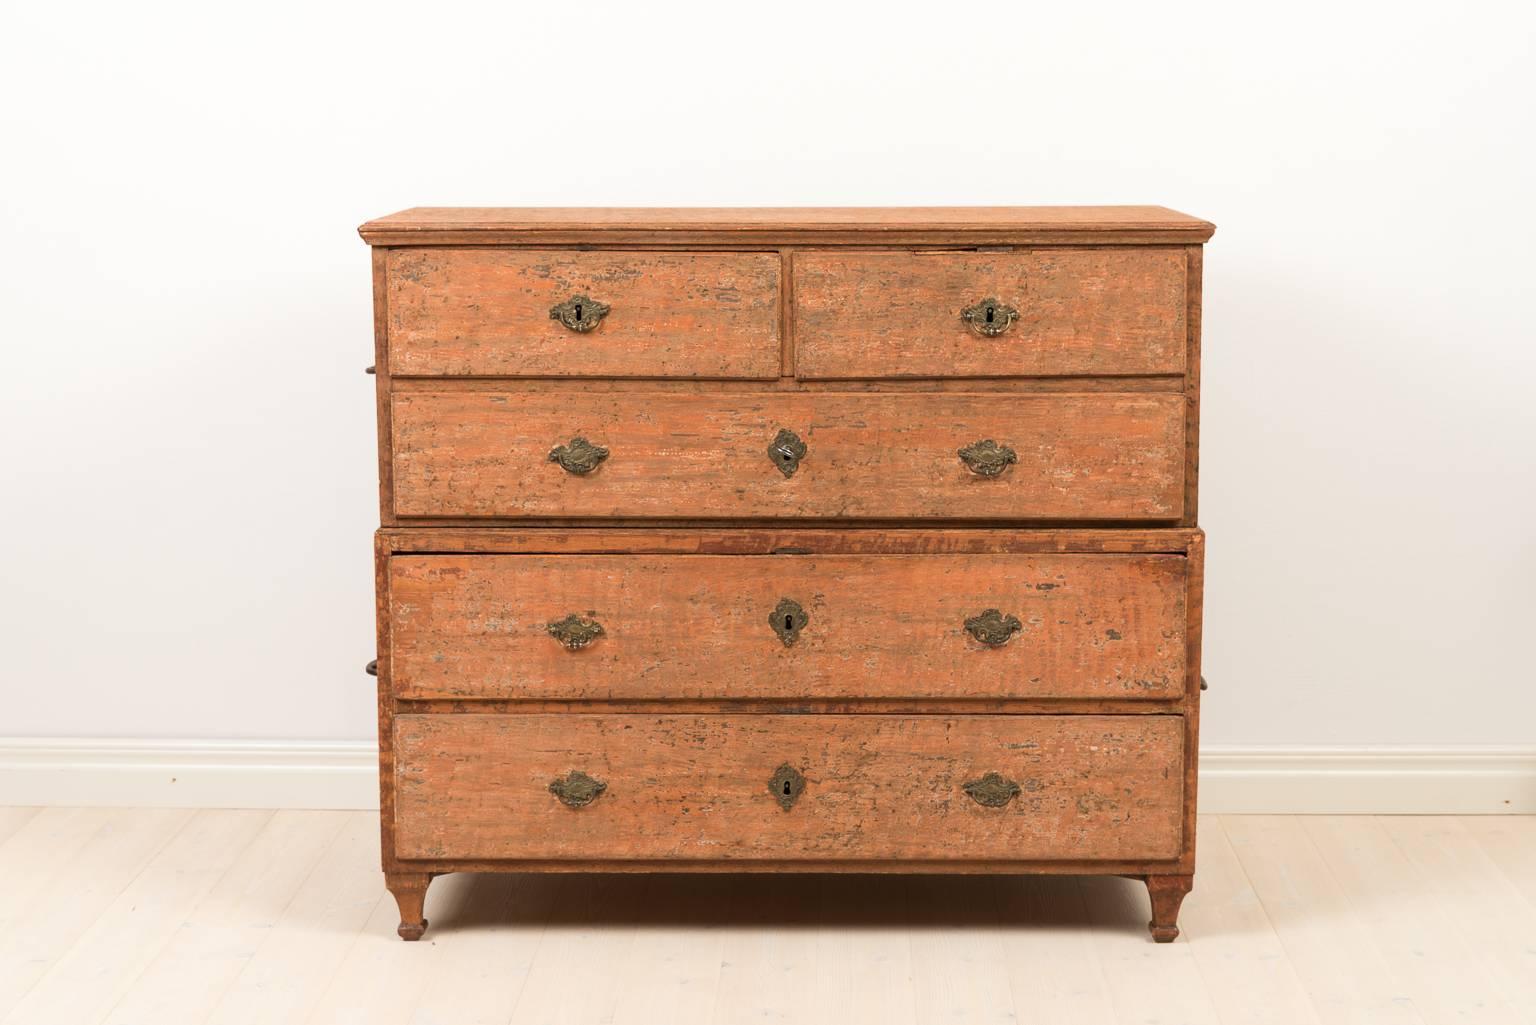 Painted 18th Century Swedish Gustavian Chest of Drawers with Original Paint